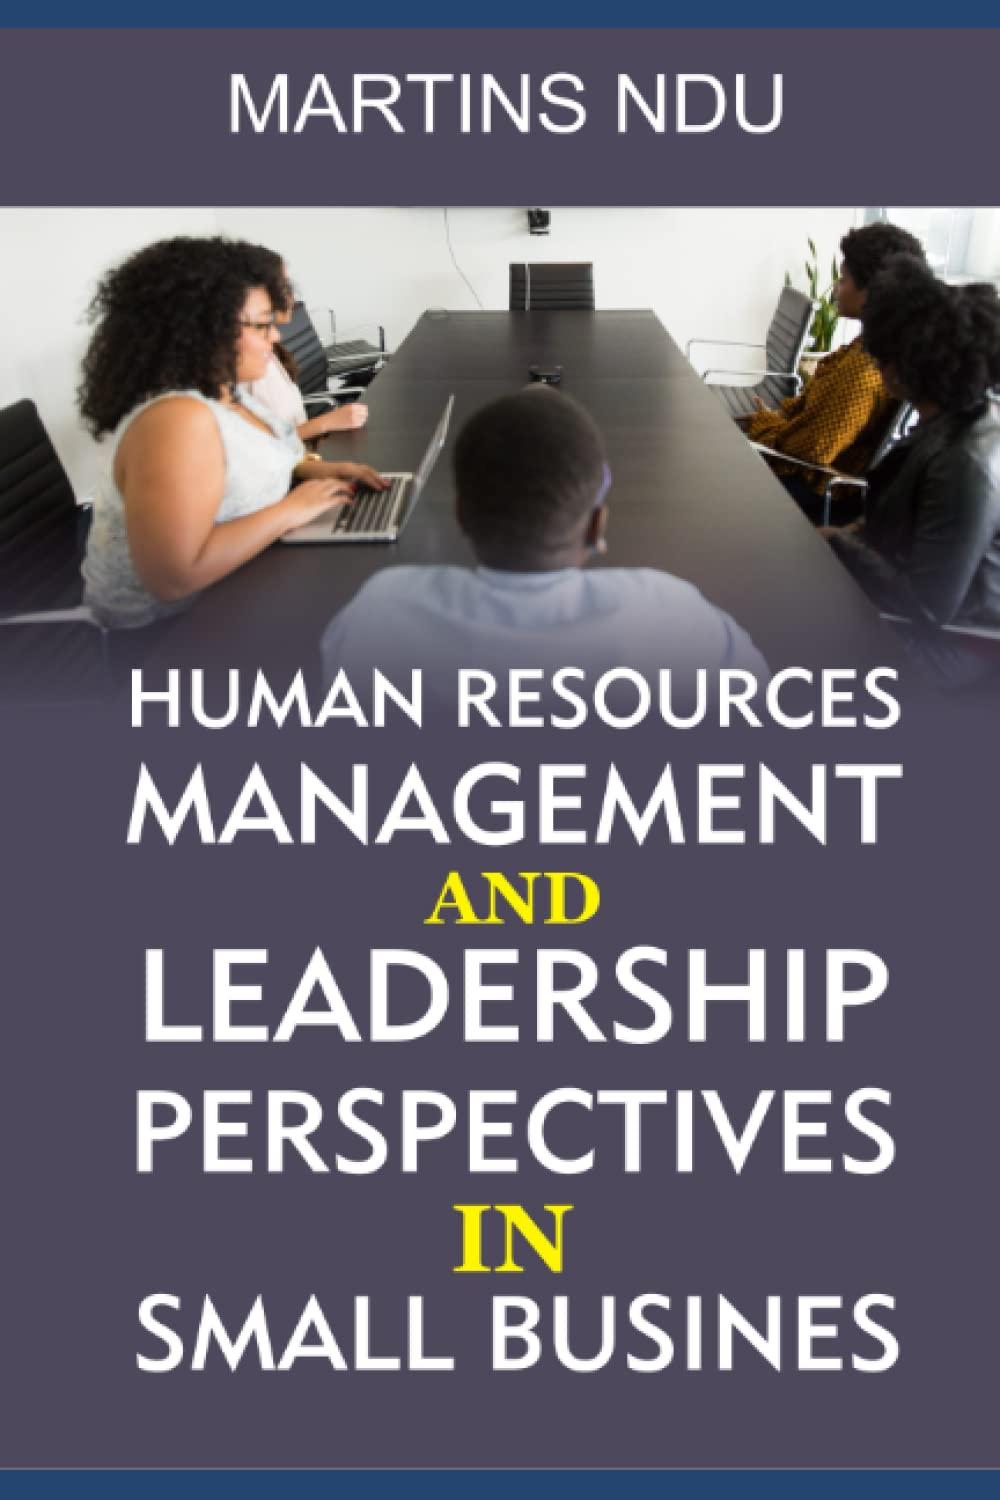 Human Resources Management And Leadership Perspectives In Small Business